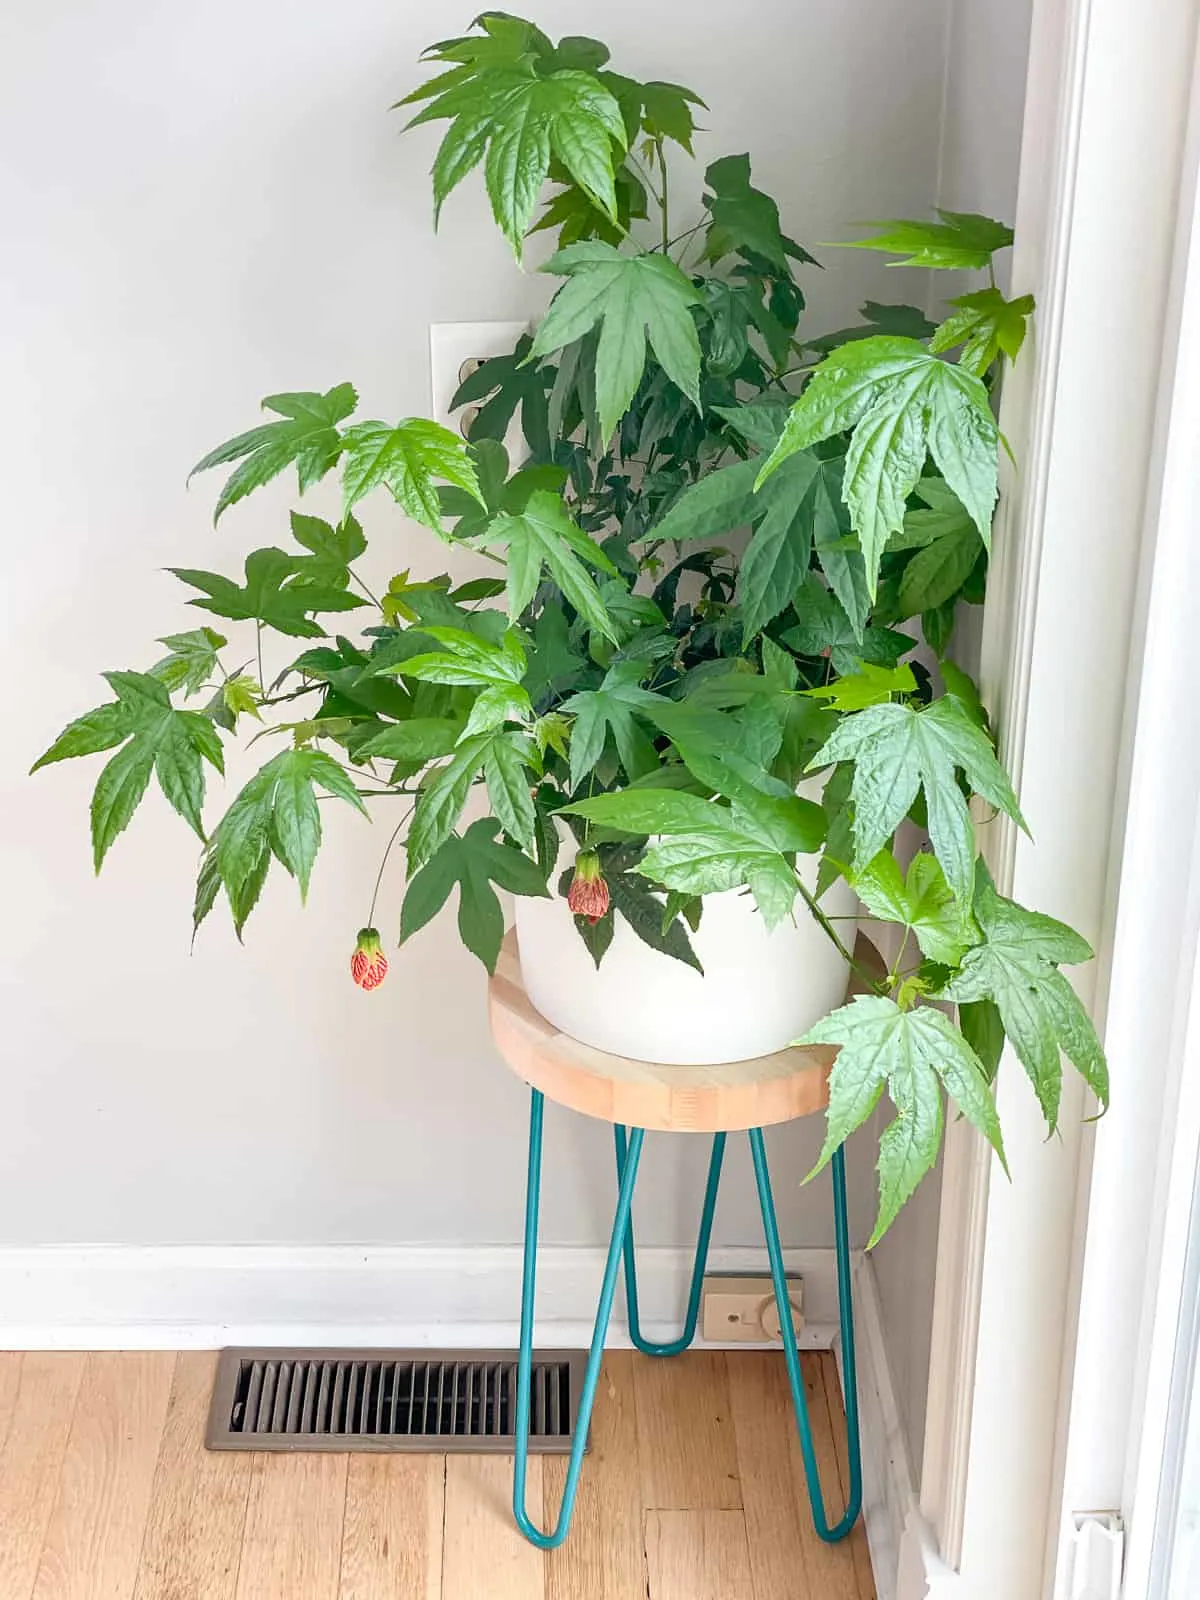 DIY hairpin leg plant stand in corner with heat vent and outlet visible